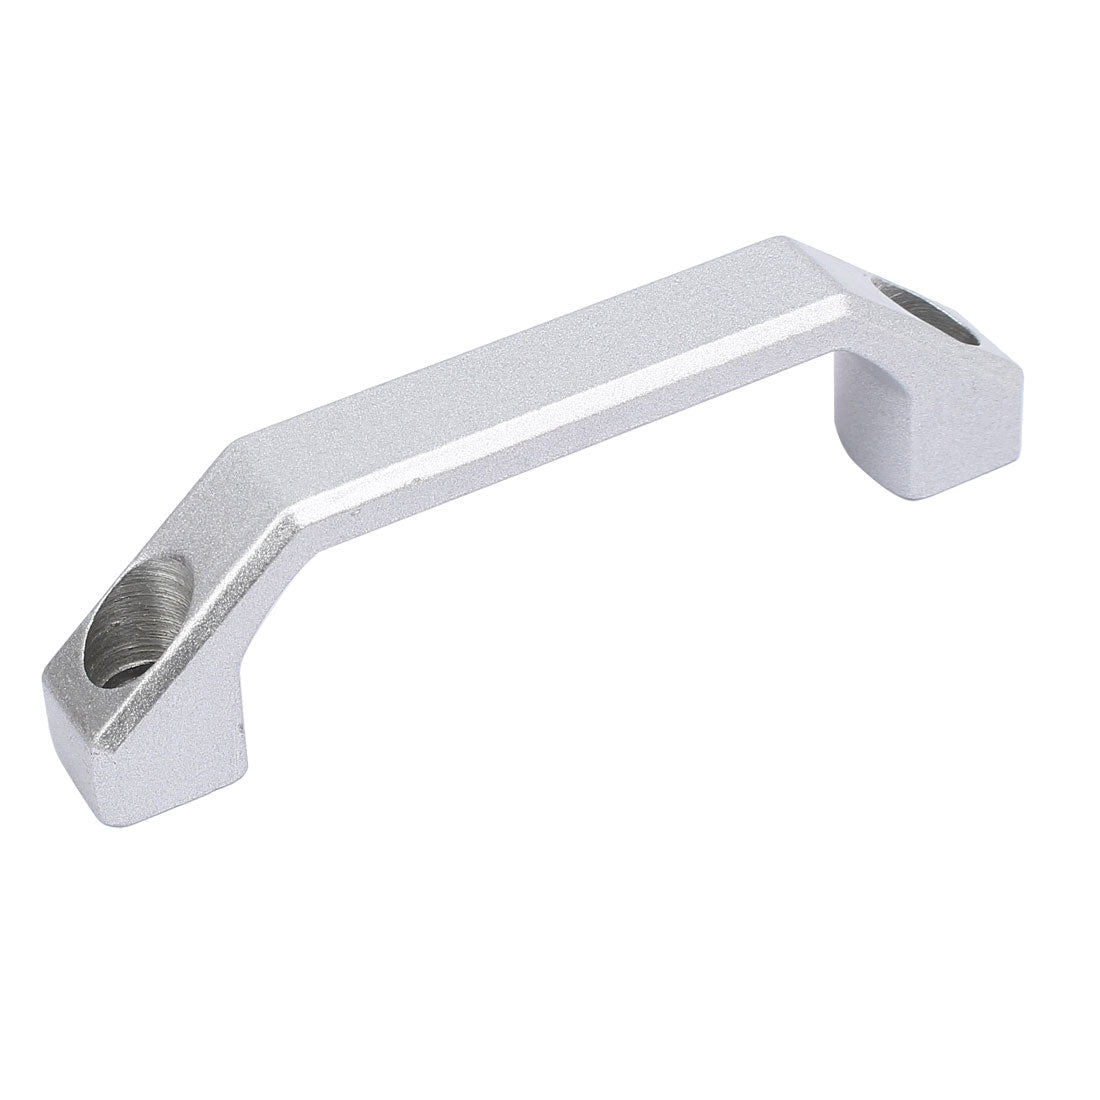 uxcell Uxcell Cabinet Door Drawer Metal Pull Handle Grip Silver Tone 100mm Hole Spacing